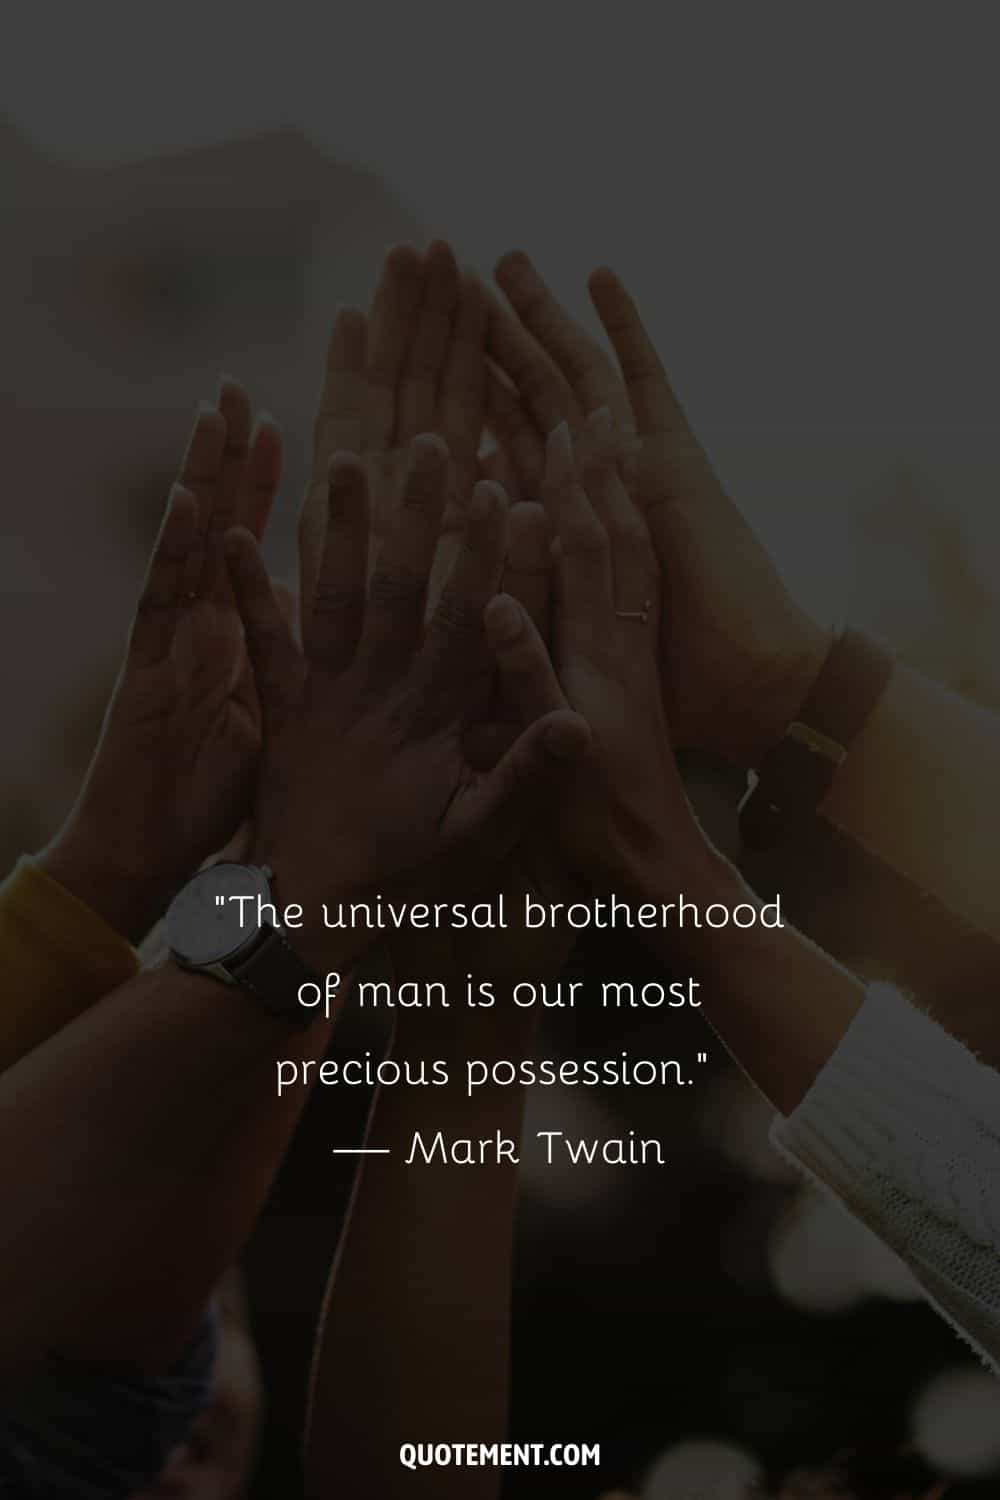 “The universal brotherhood of man is our most precious possession.” — Mark Twain